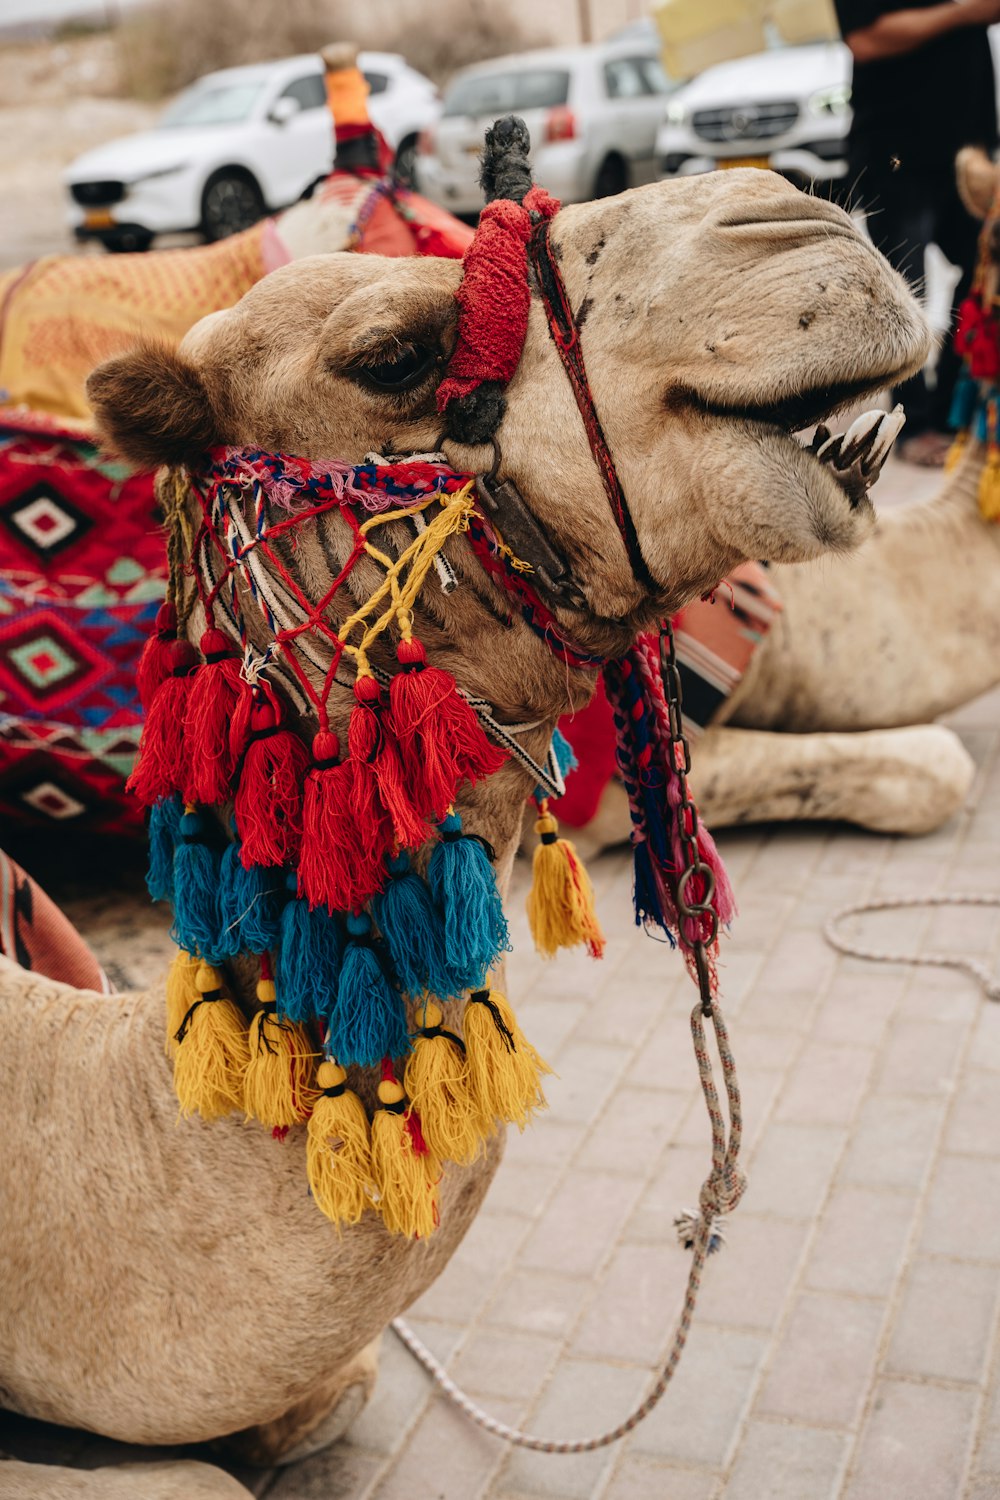 a close up of a camel on a street